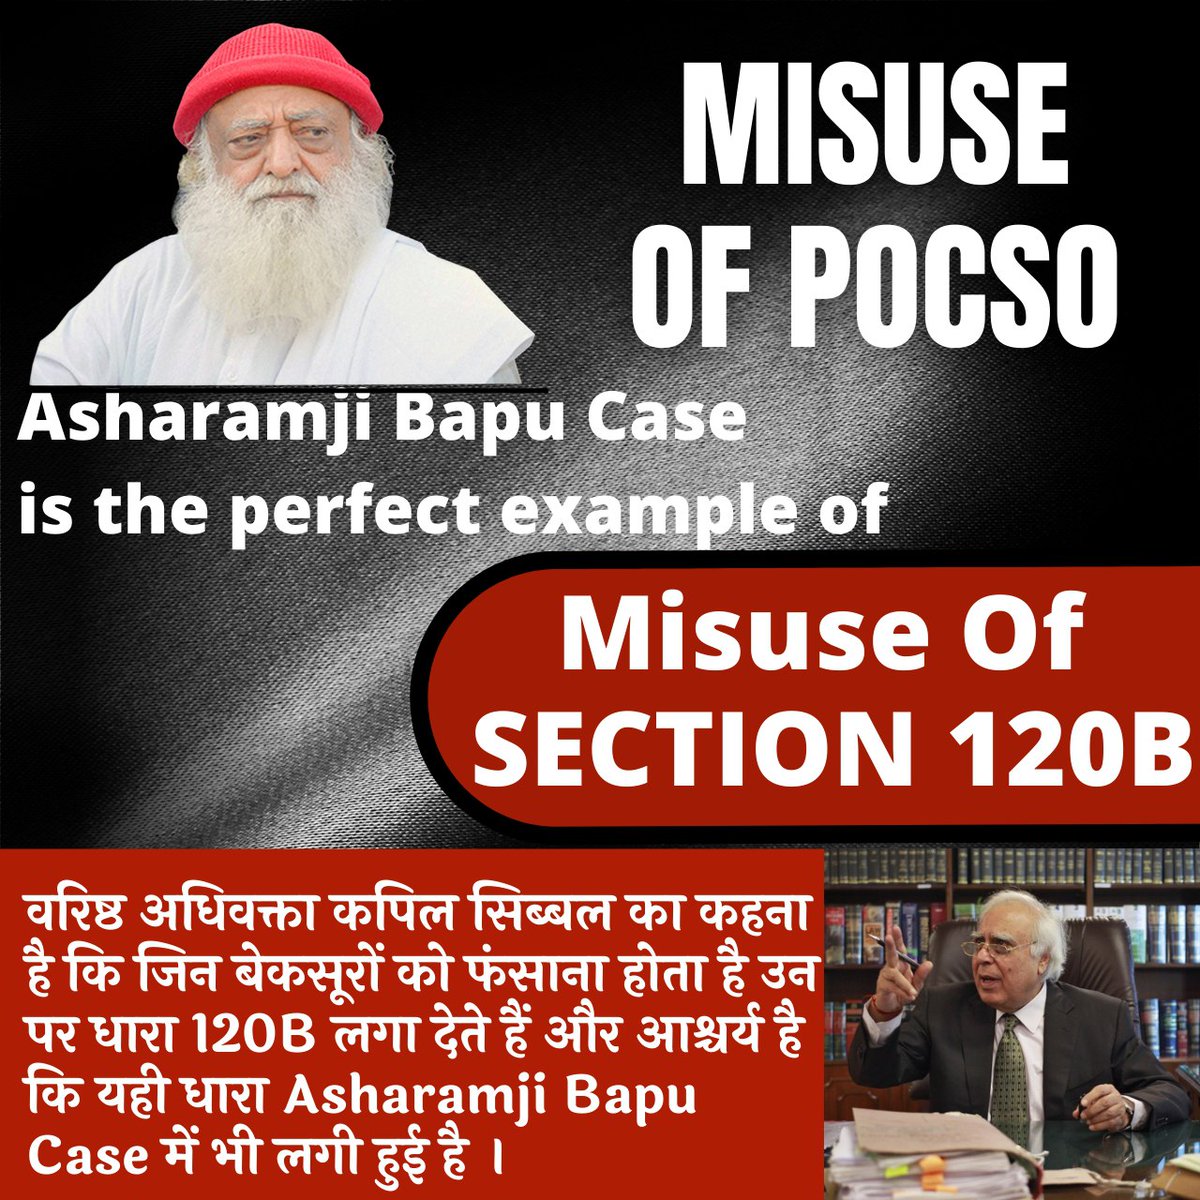 On What Basis??

Incarceration of innocents using section 120B, as exposed by Adv. Kapil Sibal recently,

& Misuse of POCSO is rapidly increasing in India.

The same #HistoryRepeated can be clearly seen in Asaram Bapu Ji Case
This is a red alert for the country demanding action!